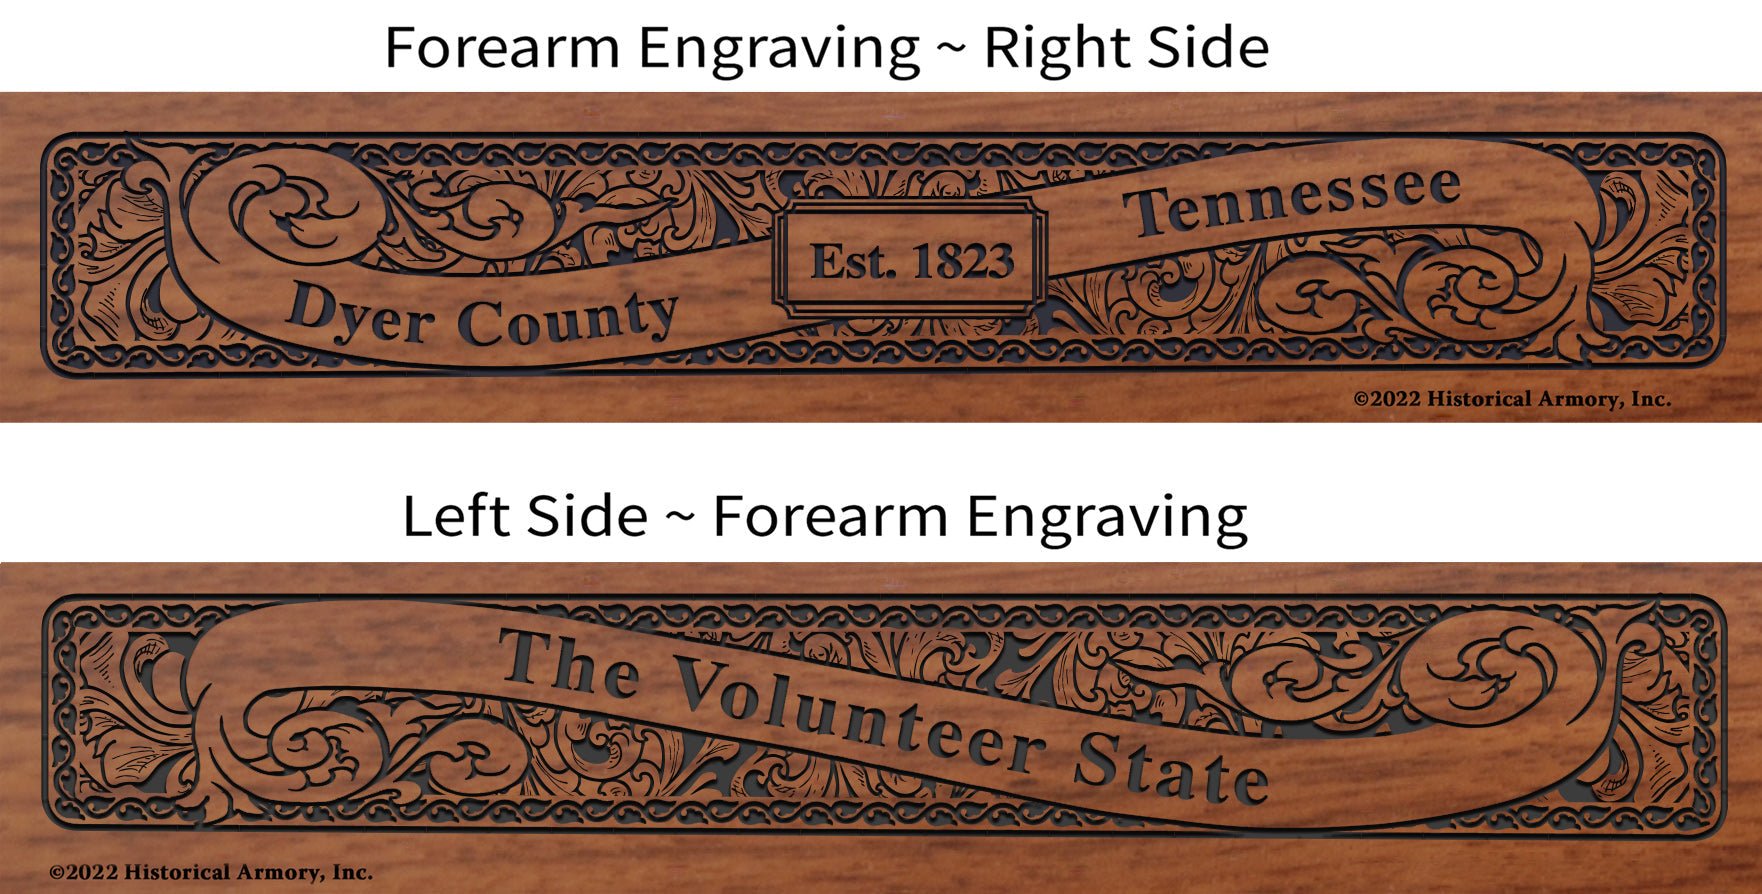 Dyer County Tennessee Engraved Rifle Forearm